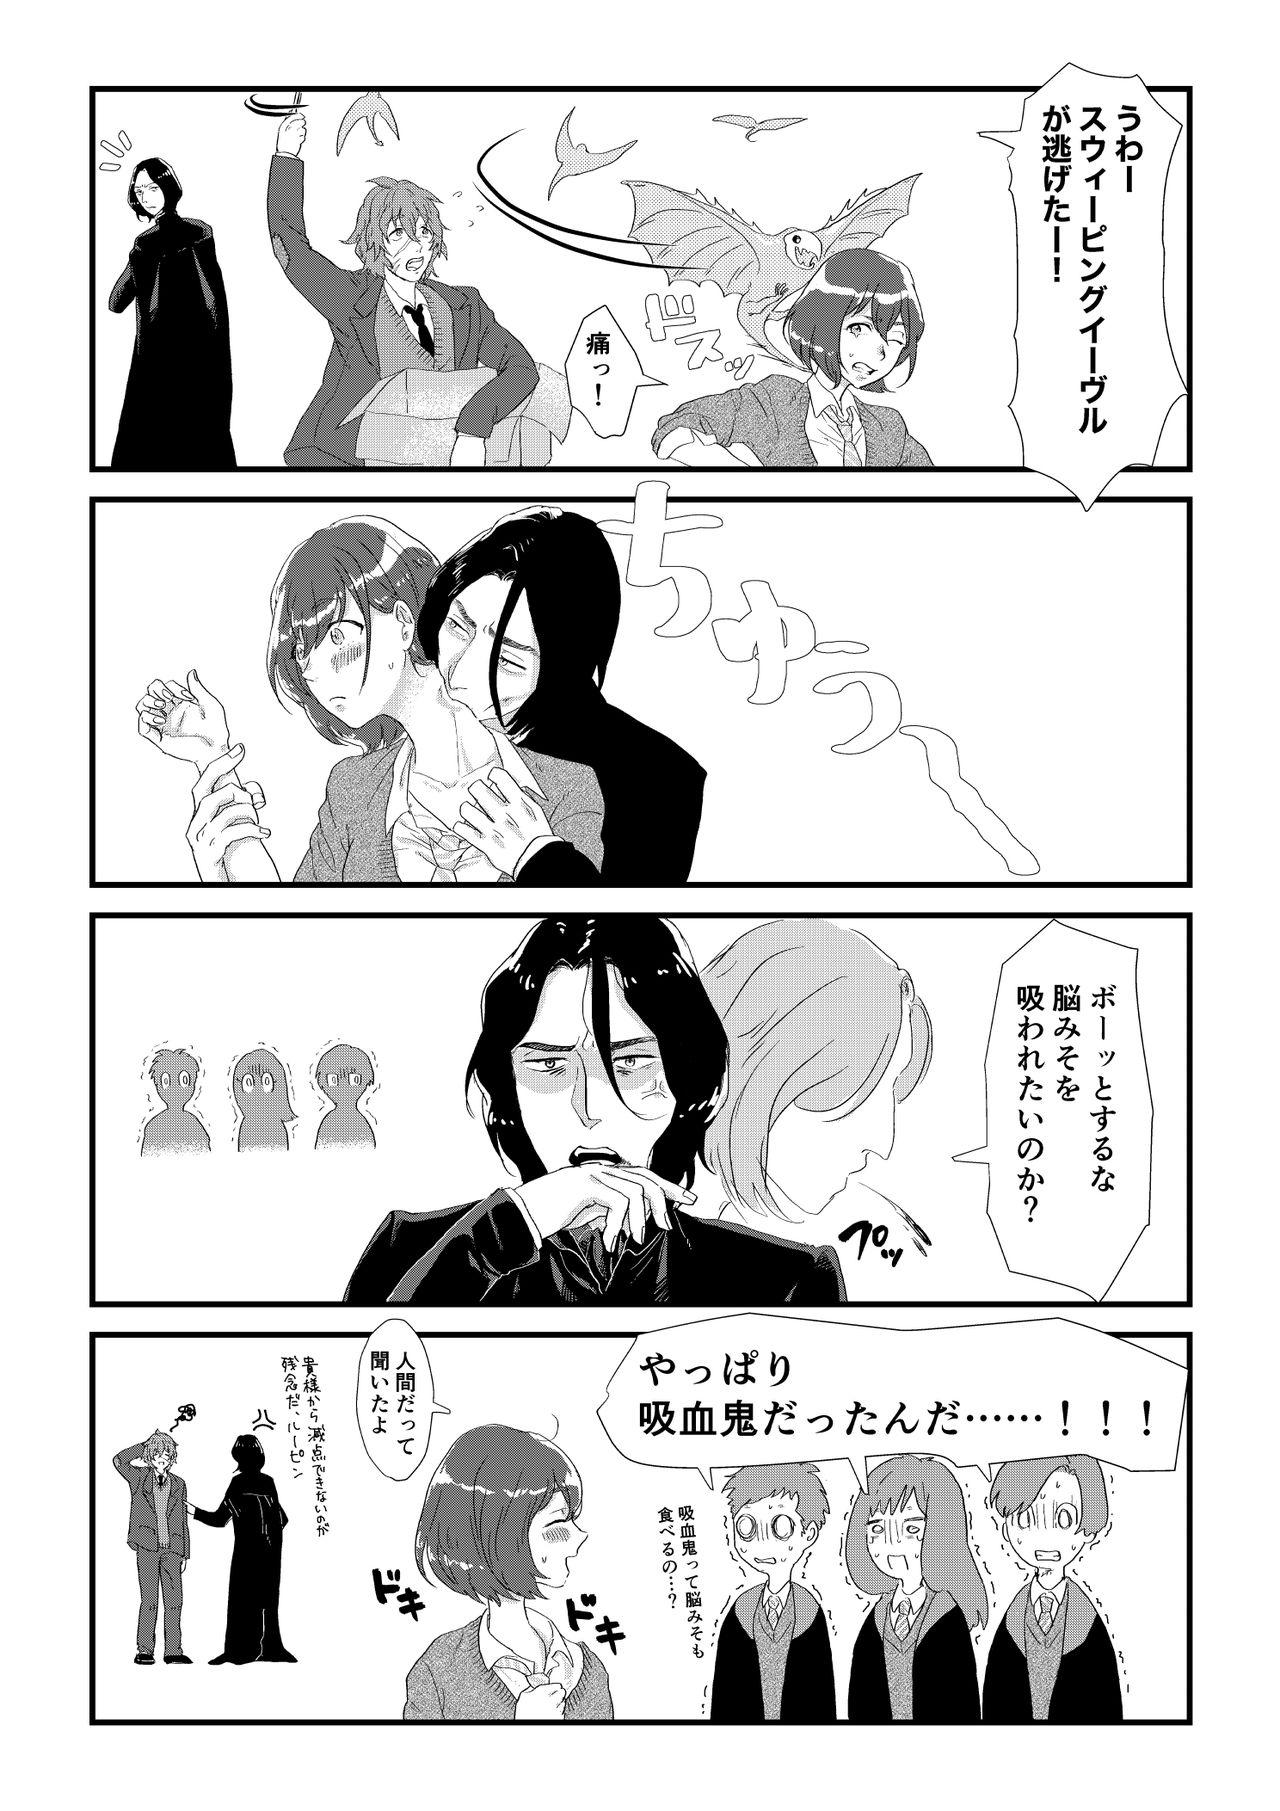 Prostitute Professor Snape and the Hufflepuff transfer student - Harry potter Atm - Page 5